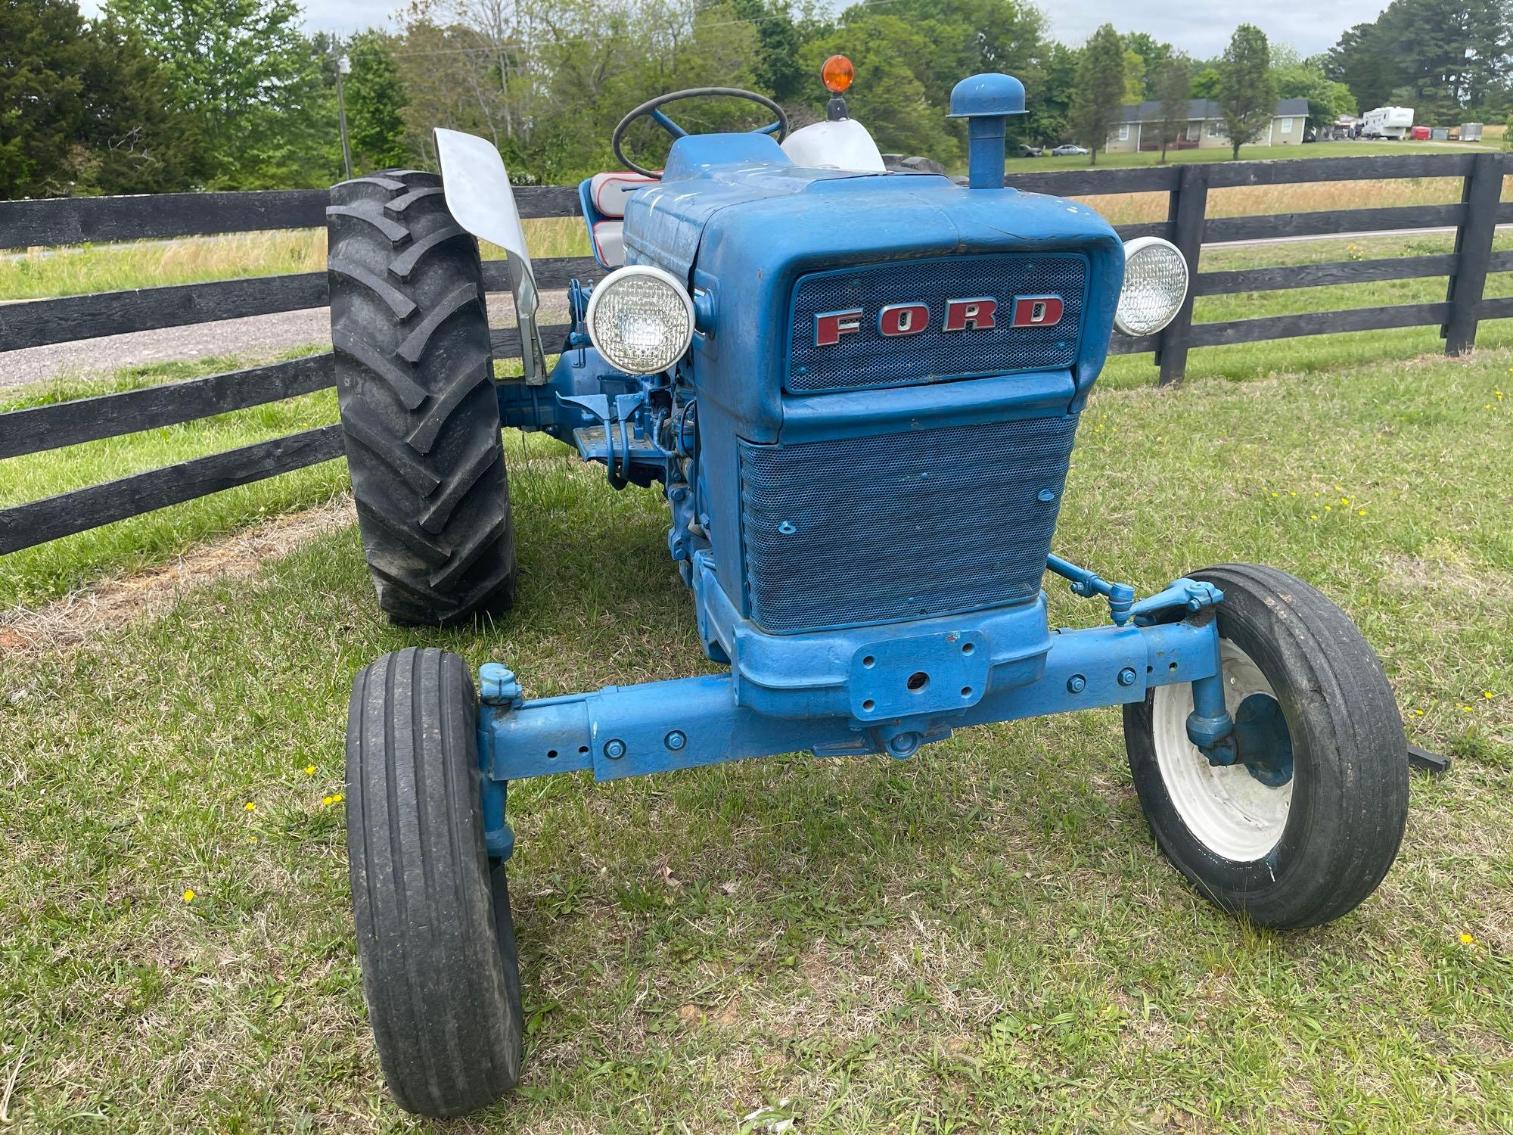 Image for 1975 Ford 4000, per seller- runs well, hour meter stopped working 2 years ago showing 1435